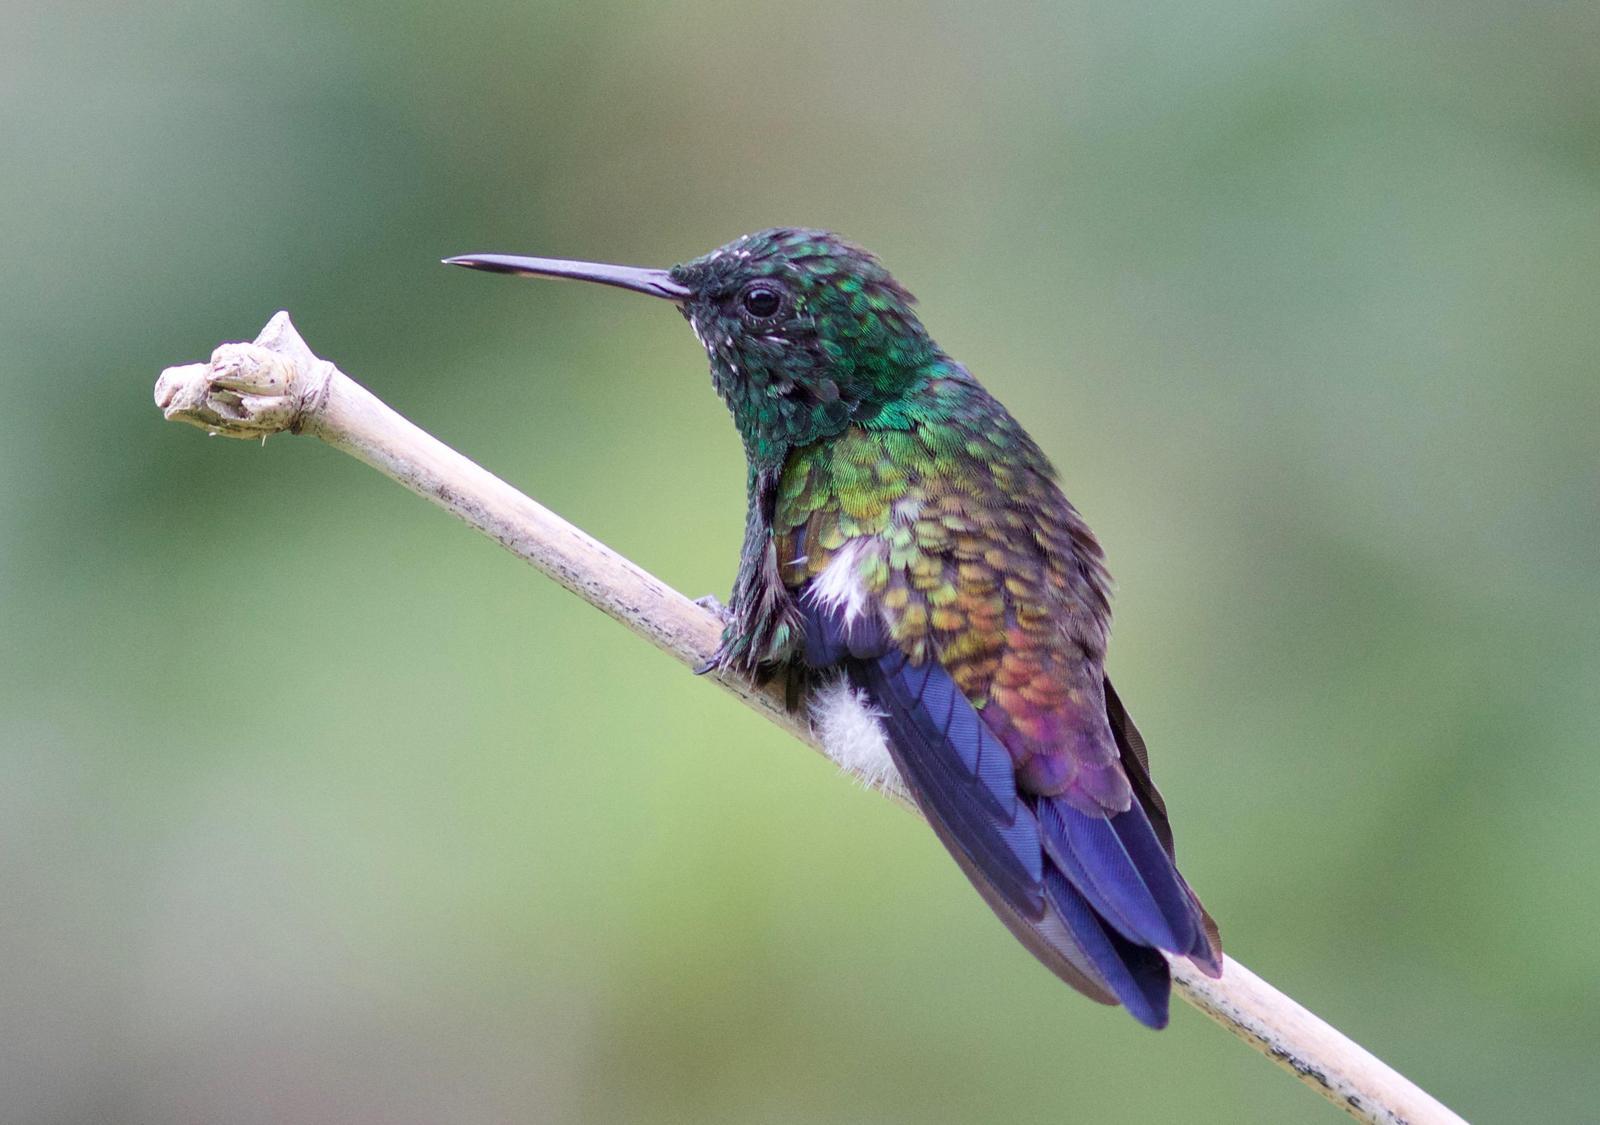 Copper-rumped Hummingbird Photo by Andre  Moncrieff